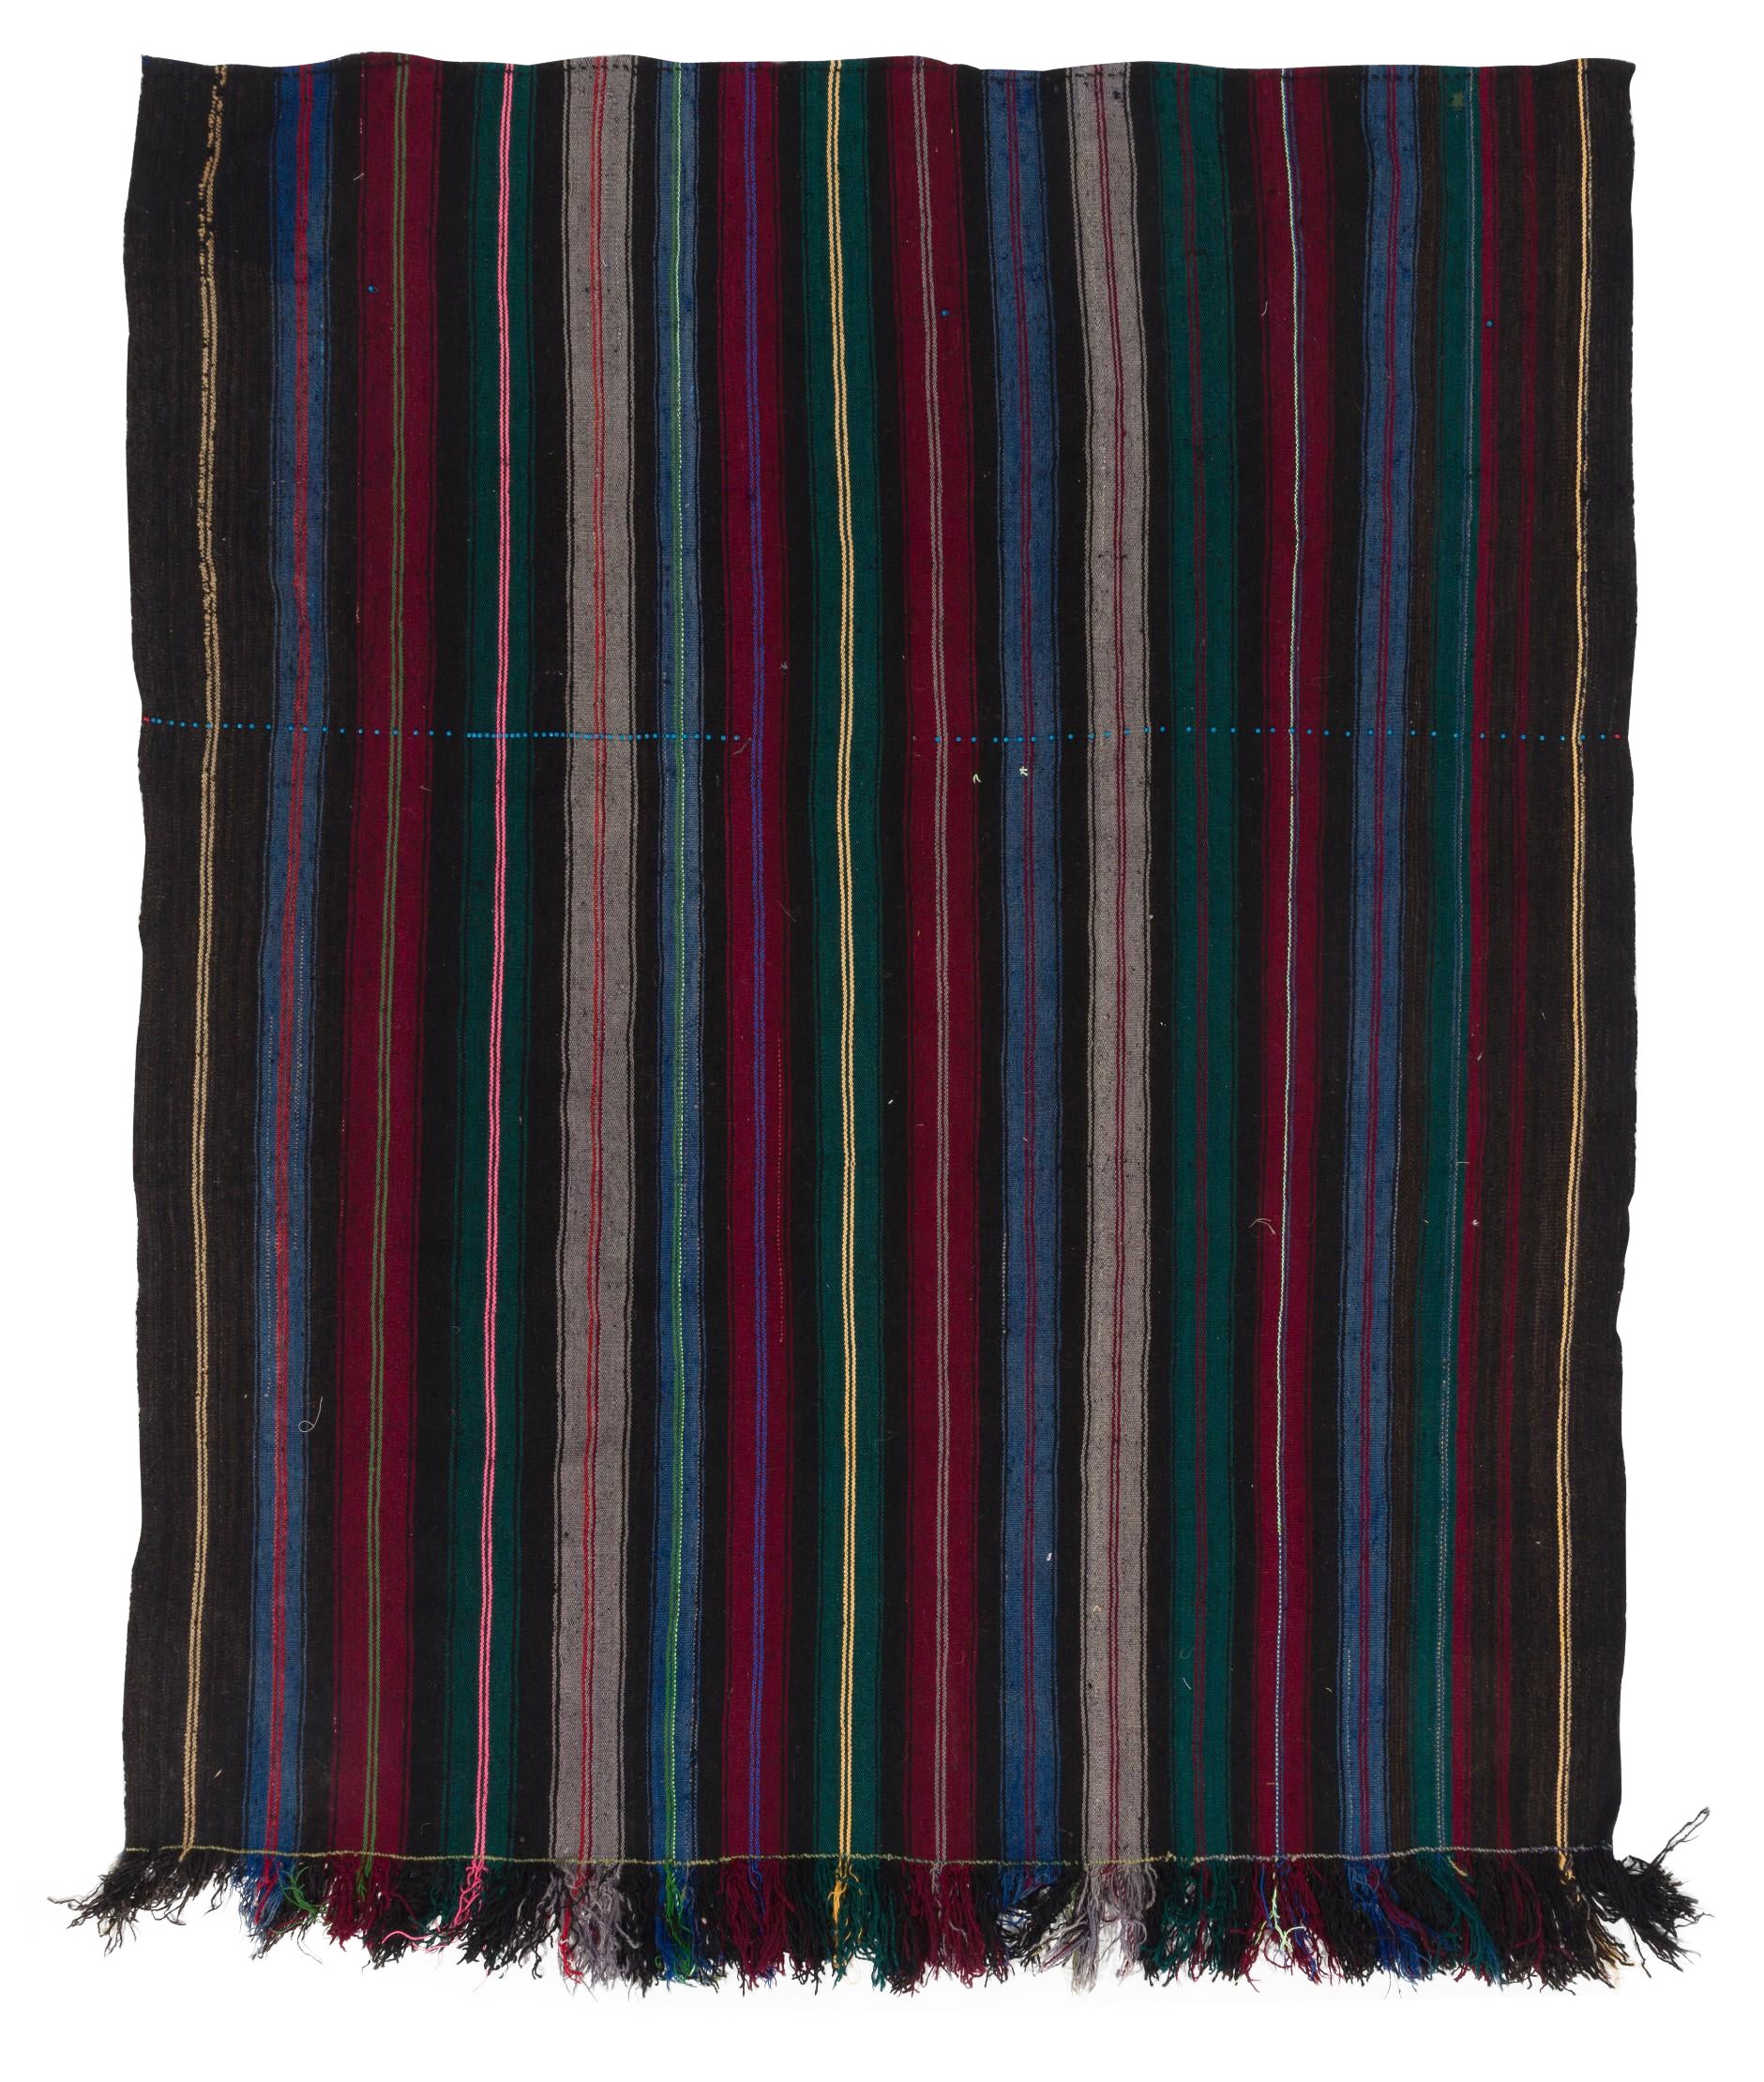 5.6x6.5 ft Hand-Woven Vintage Kilim "Flat-weave" with Vertical Bands, 100% Wool For Sale